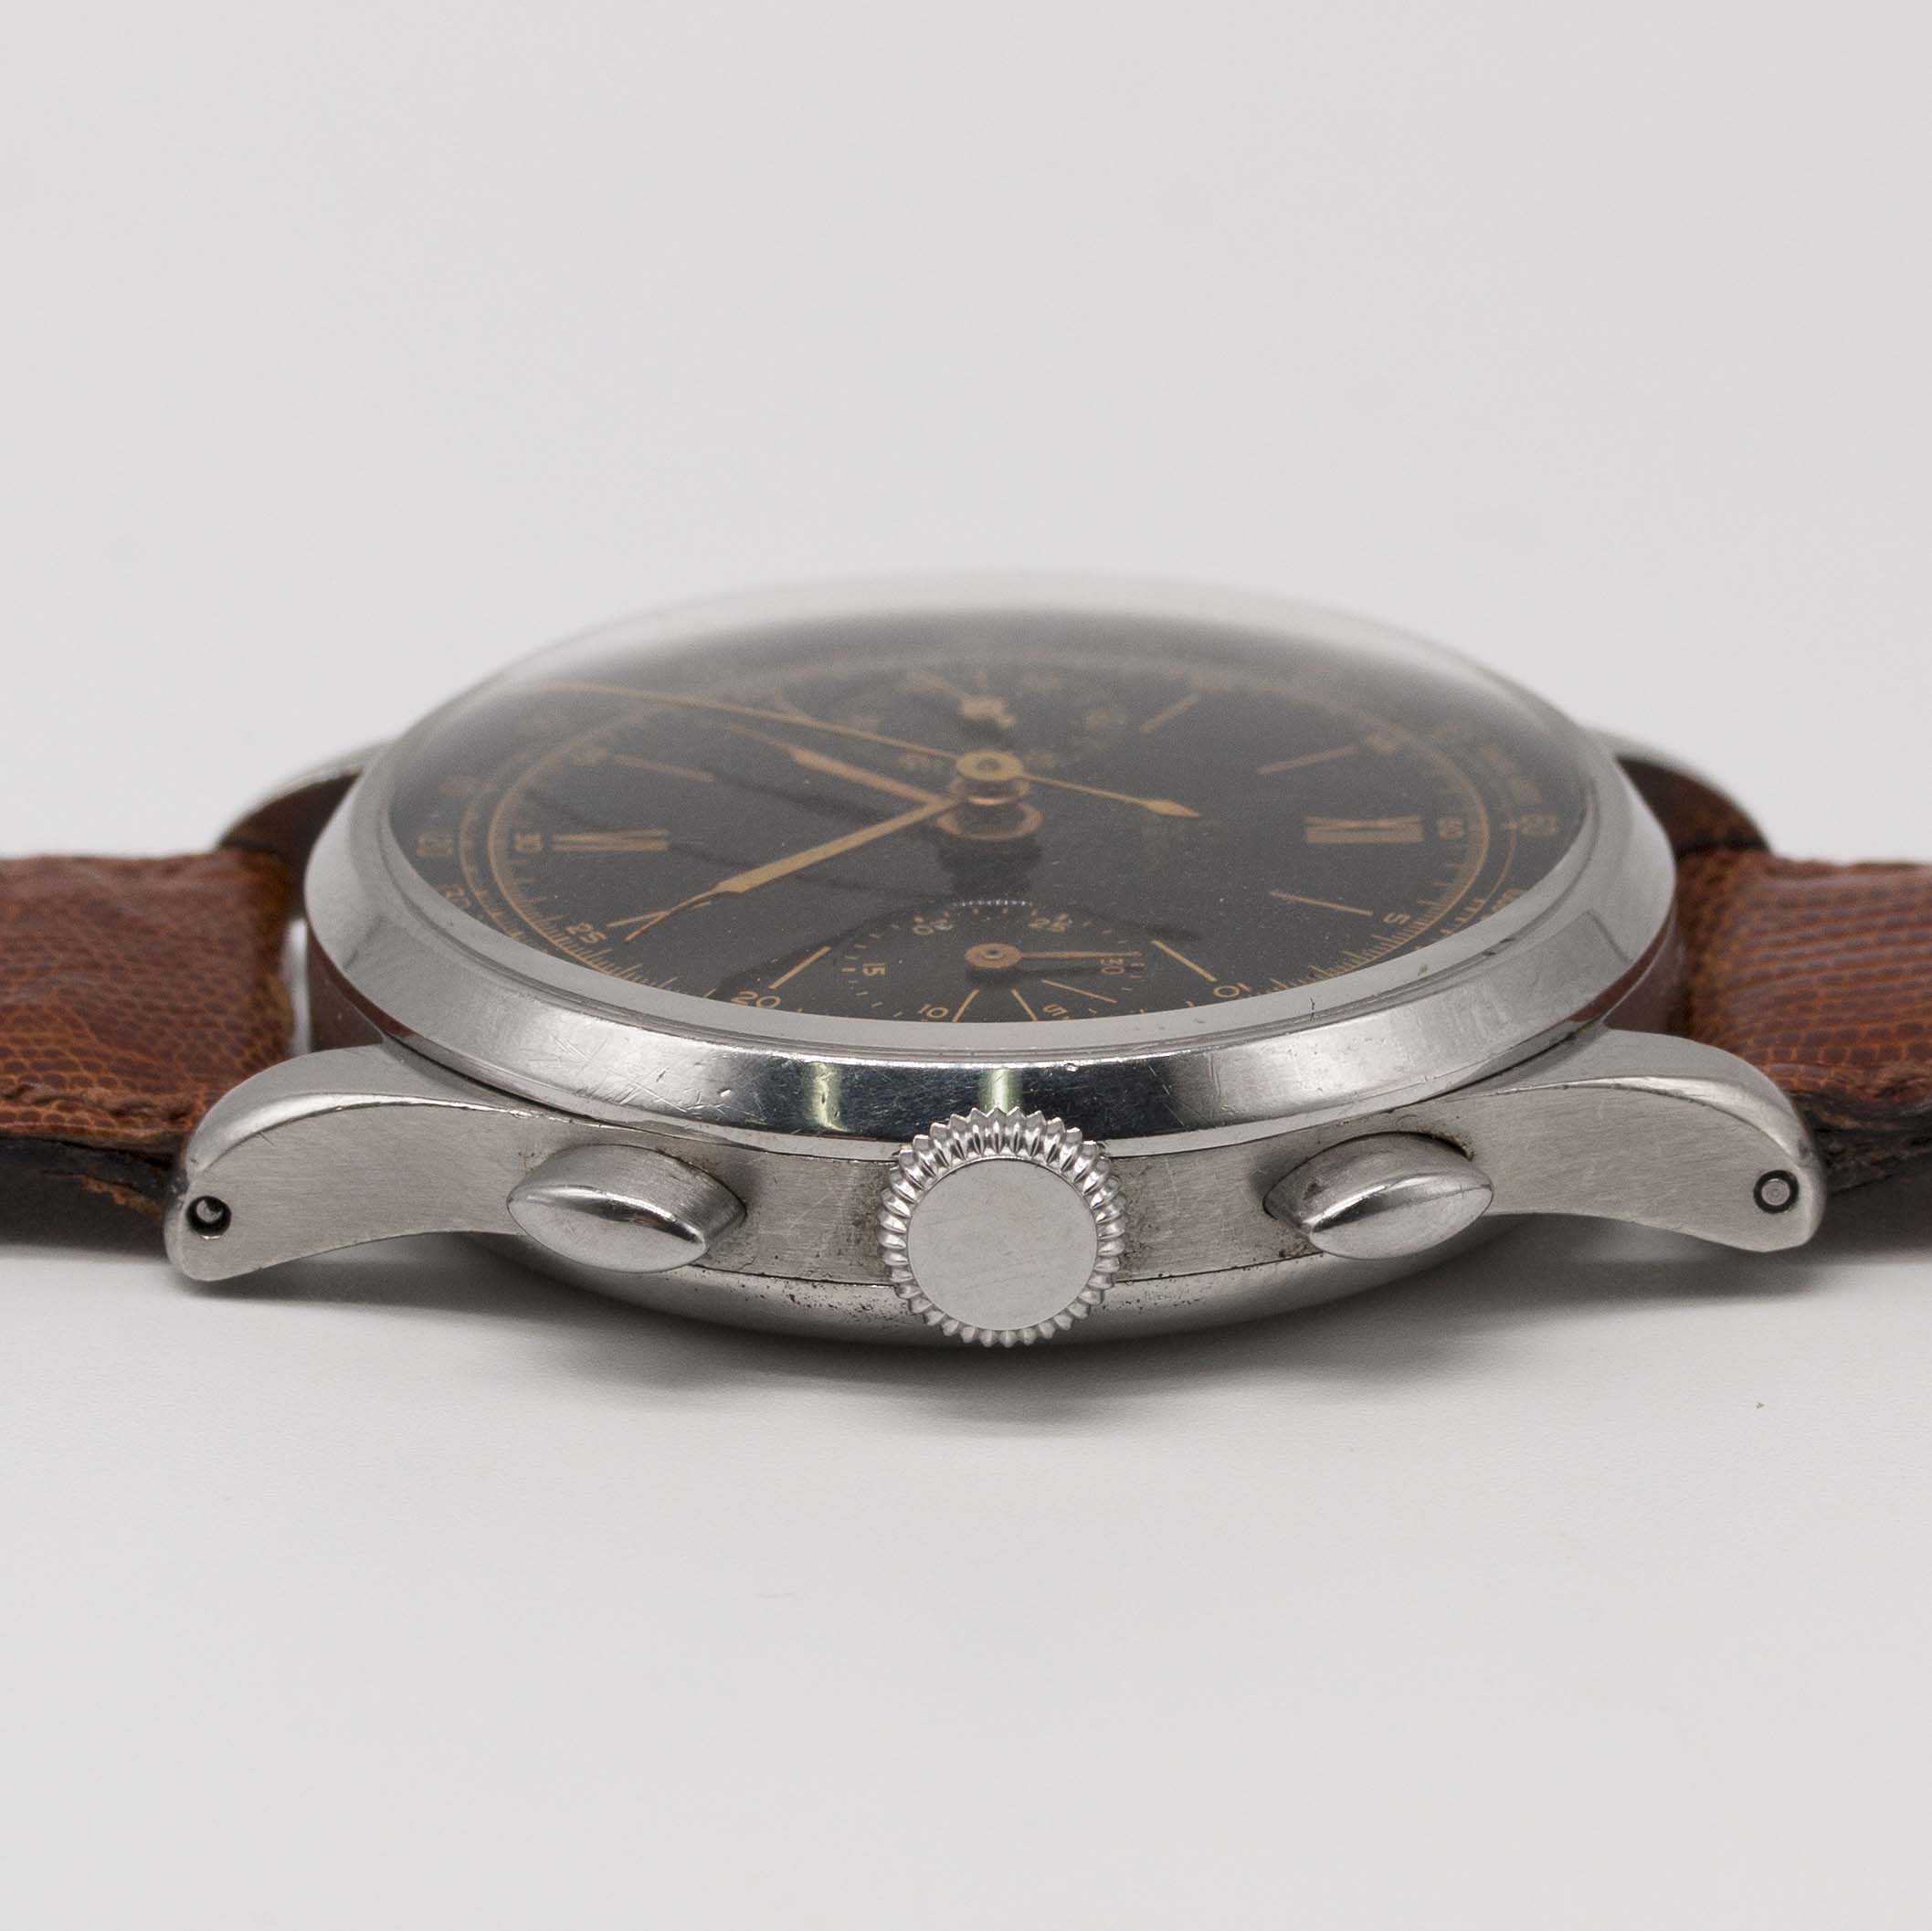 A VERY RARE GENTLEMAN'S LARGE SIZE STAINLESS STEEL OMEGA "33.3" CHRONOGRAPH WRIST WATCH CIRCA - Image 10 of 11